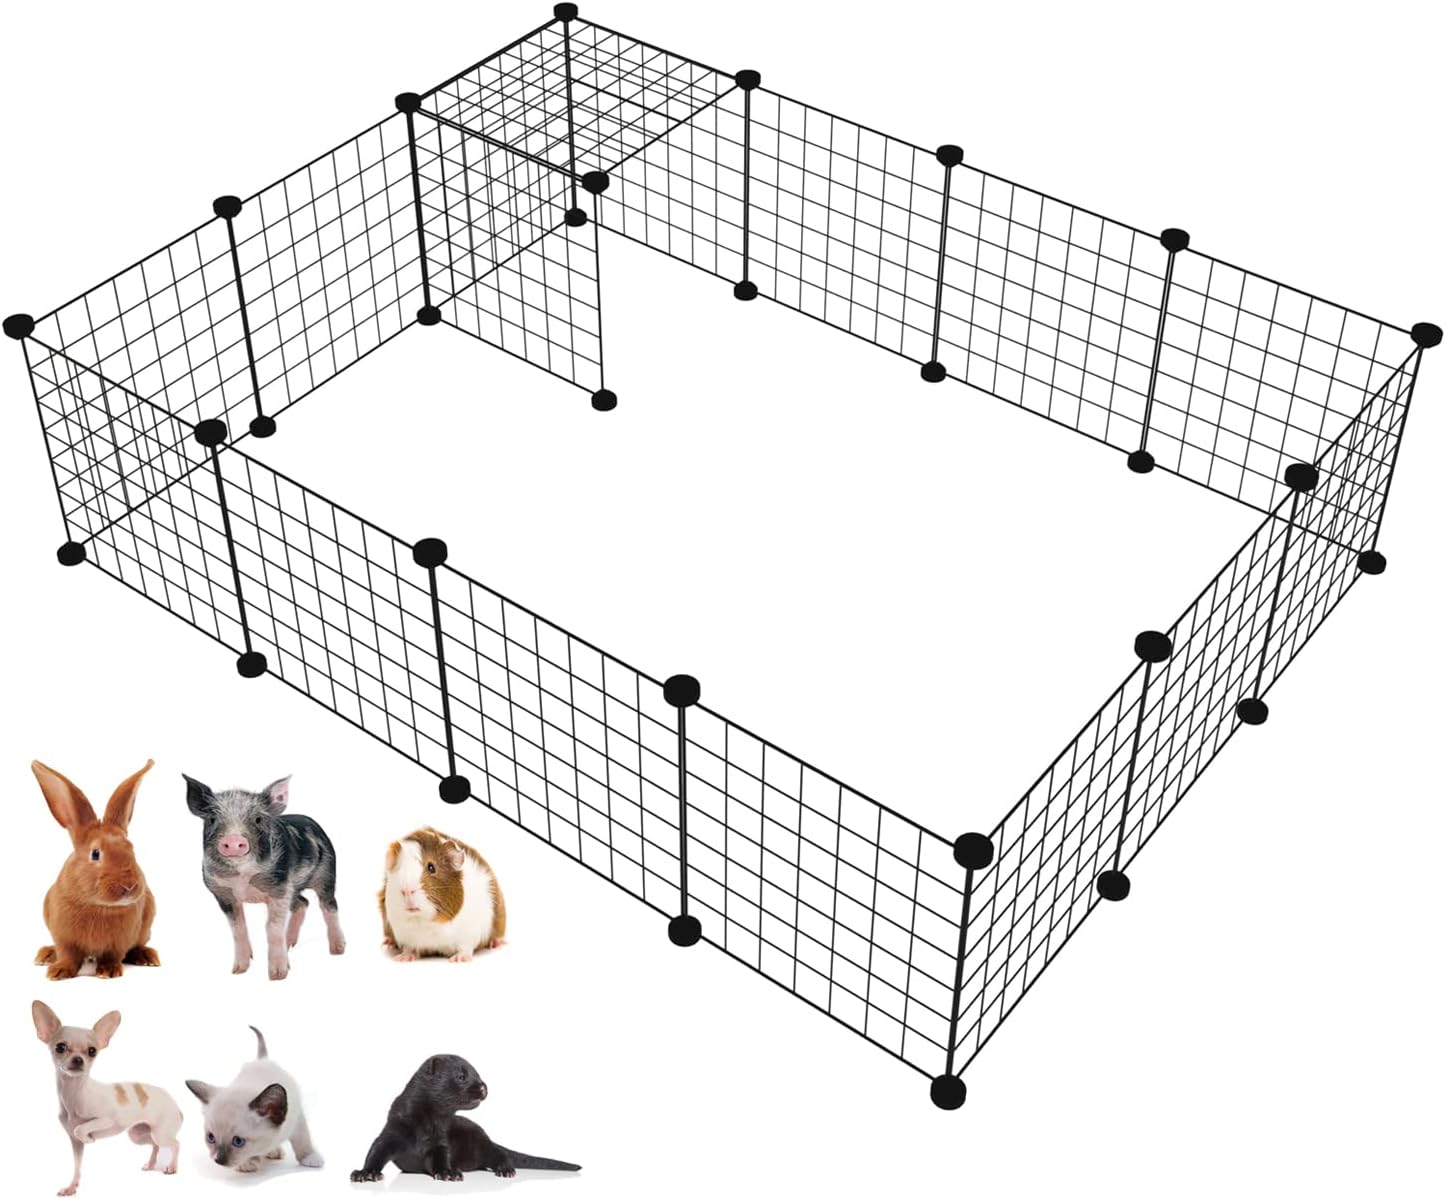 LANGXUN Metal Wire Storage Cubes Organizer, DIY Small Animal Cage for Rabbit, Guinea Pigs, Puppy | Pet Products Portable Metal Wire Yard Fence (Black, 16 Panels)